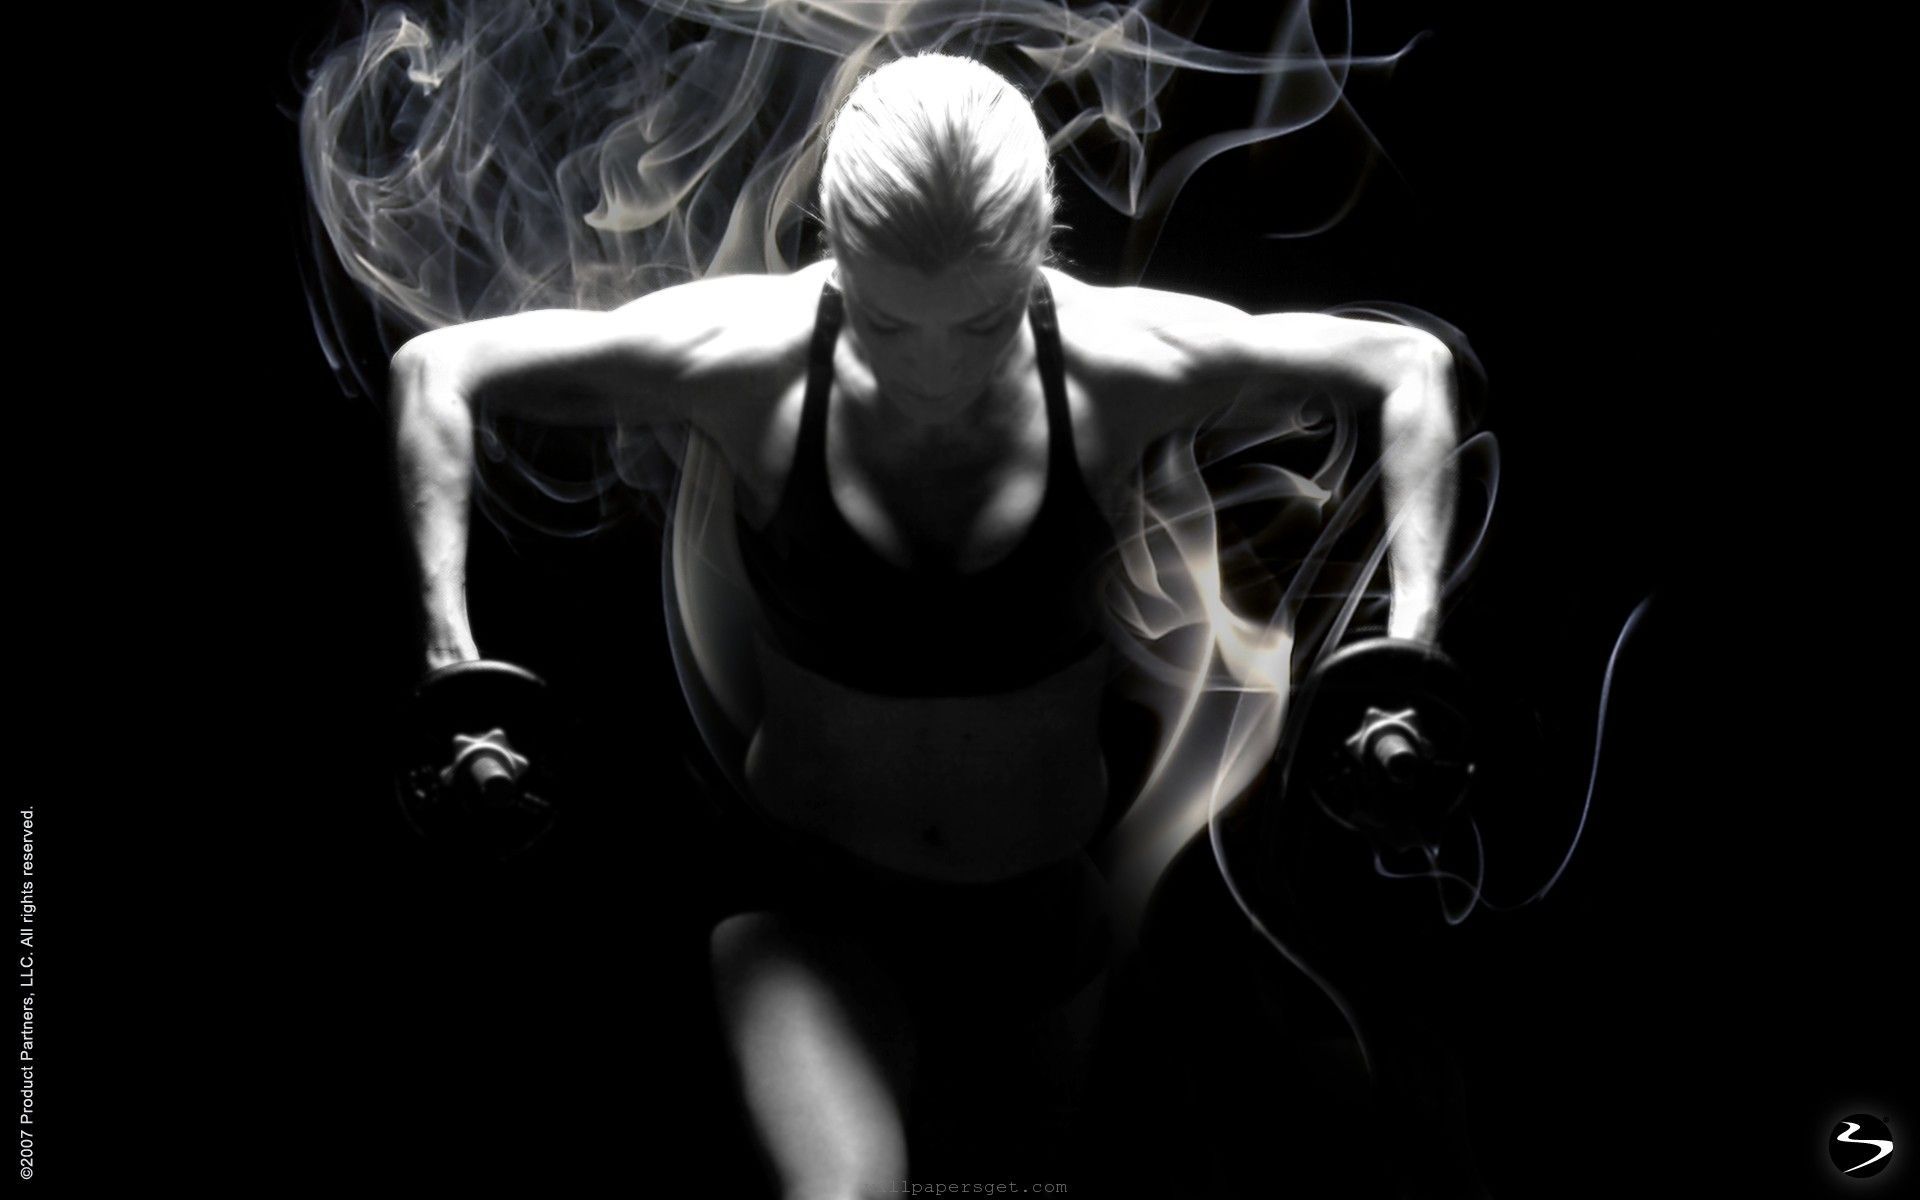 1920x1200px Women and Men Fitness Wallpaper. Fitness wallpaper, Strength training routine, Workout guide